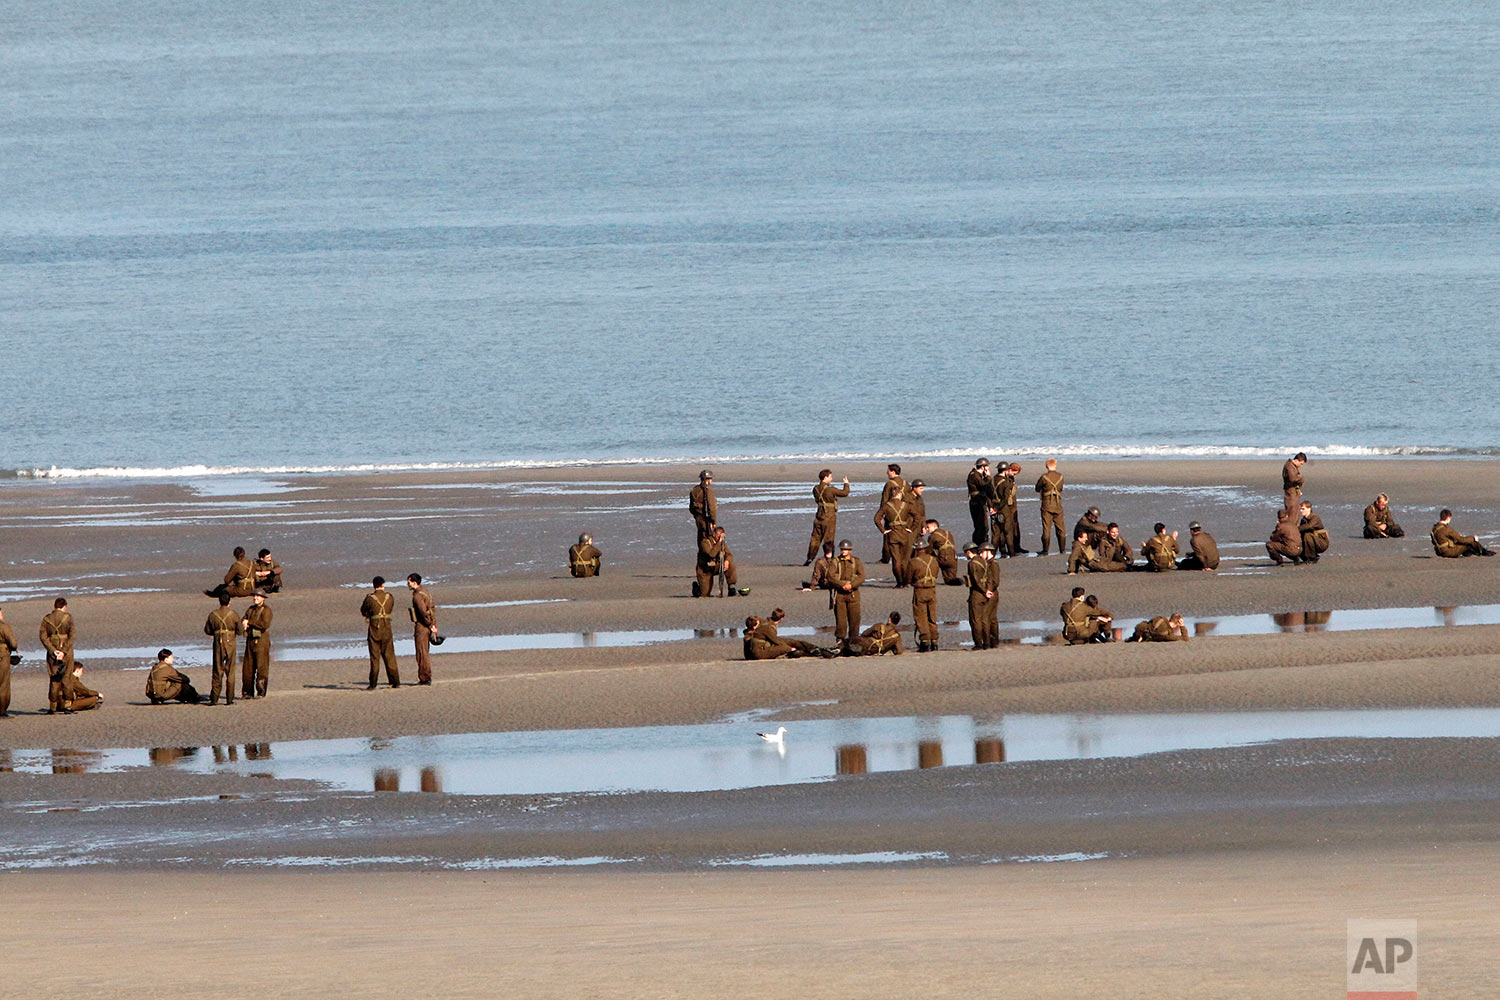  Actors wait on the beach before filming a scene for the film, "Dunkirk," in Dunkirk, northern France, Thursday, May 26, 2016. The film, directed by Christopher Nolan, tells the story of the Dunkirk evacuation, which took place at the beginning of Wo